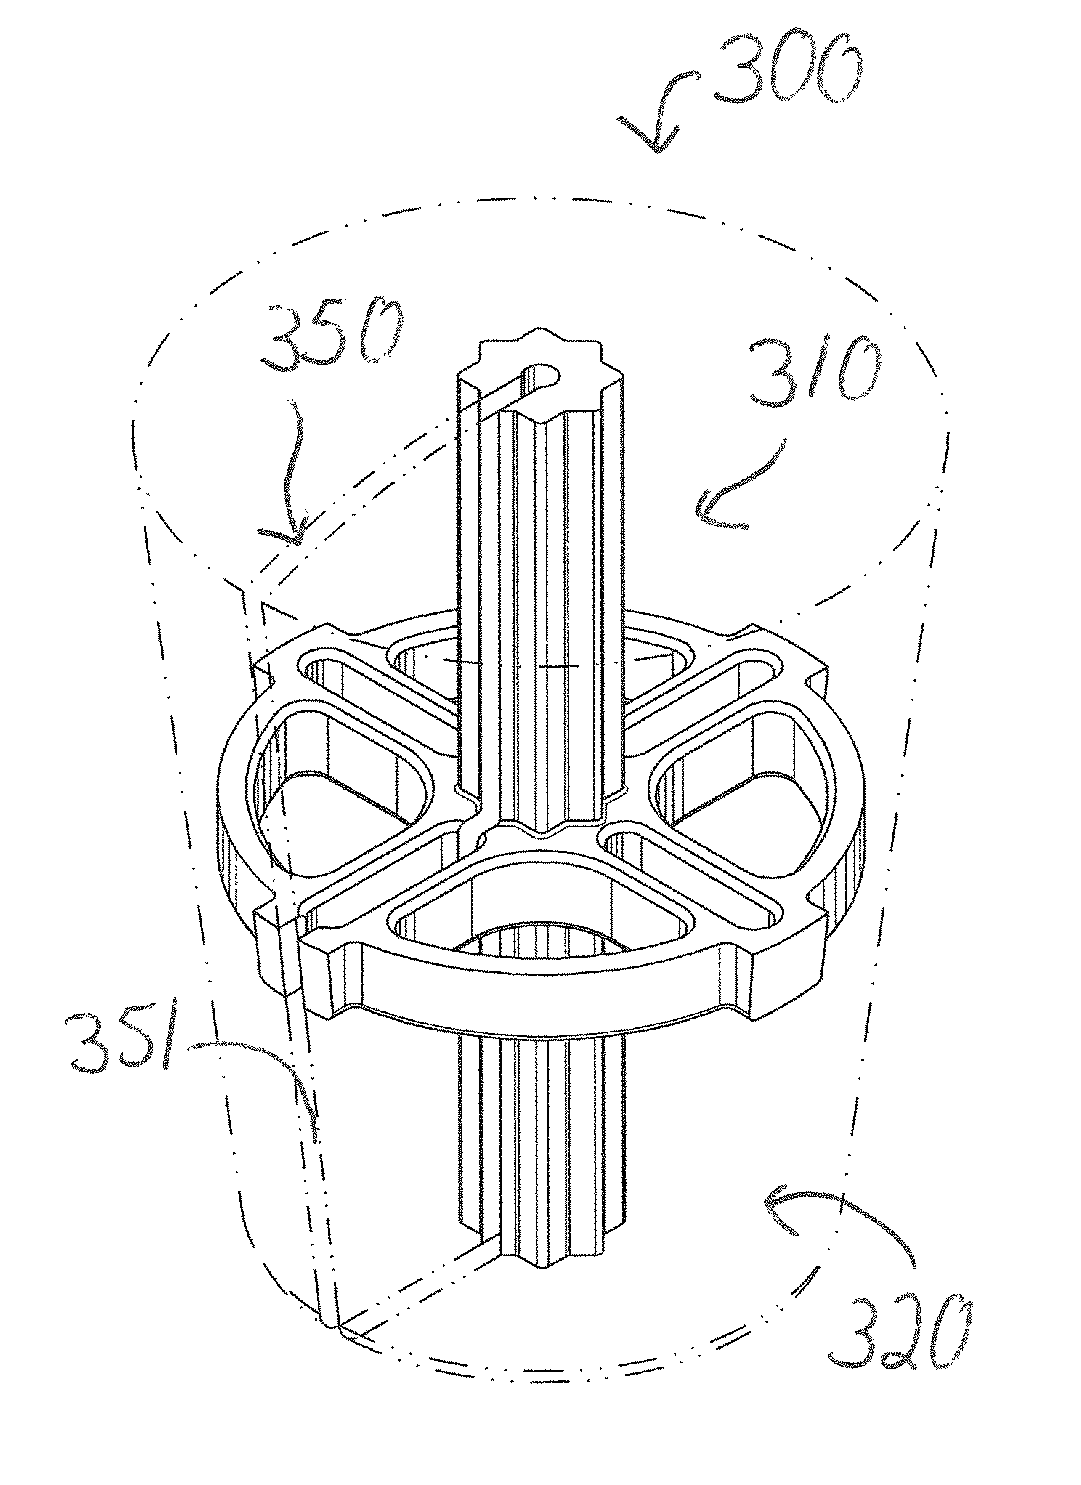 Fly-fishing float or strike indicator and attachment methods